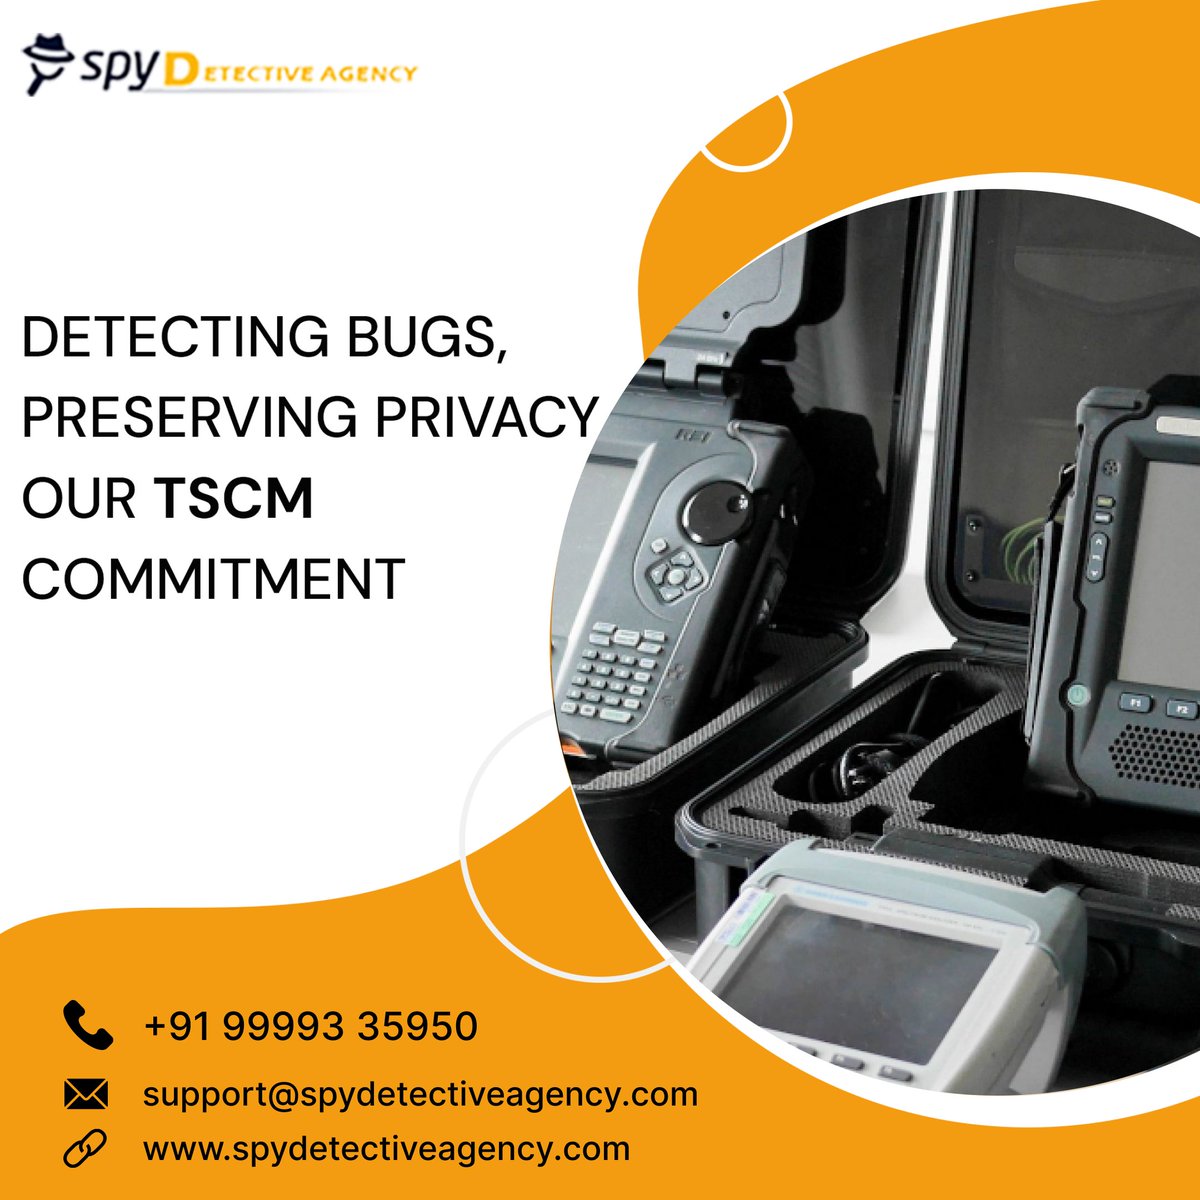 Protecting your privacy is our priority! 🛡️ With our TSCM commitment, we're dedicated to detecting bugs and preserving your confidentiality. Trust us to safeguard your sensitive information. 🌐 Read More: shorturl.at/gJOU3 #BugSweep #TSCM #PrivacyProtection #SPY